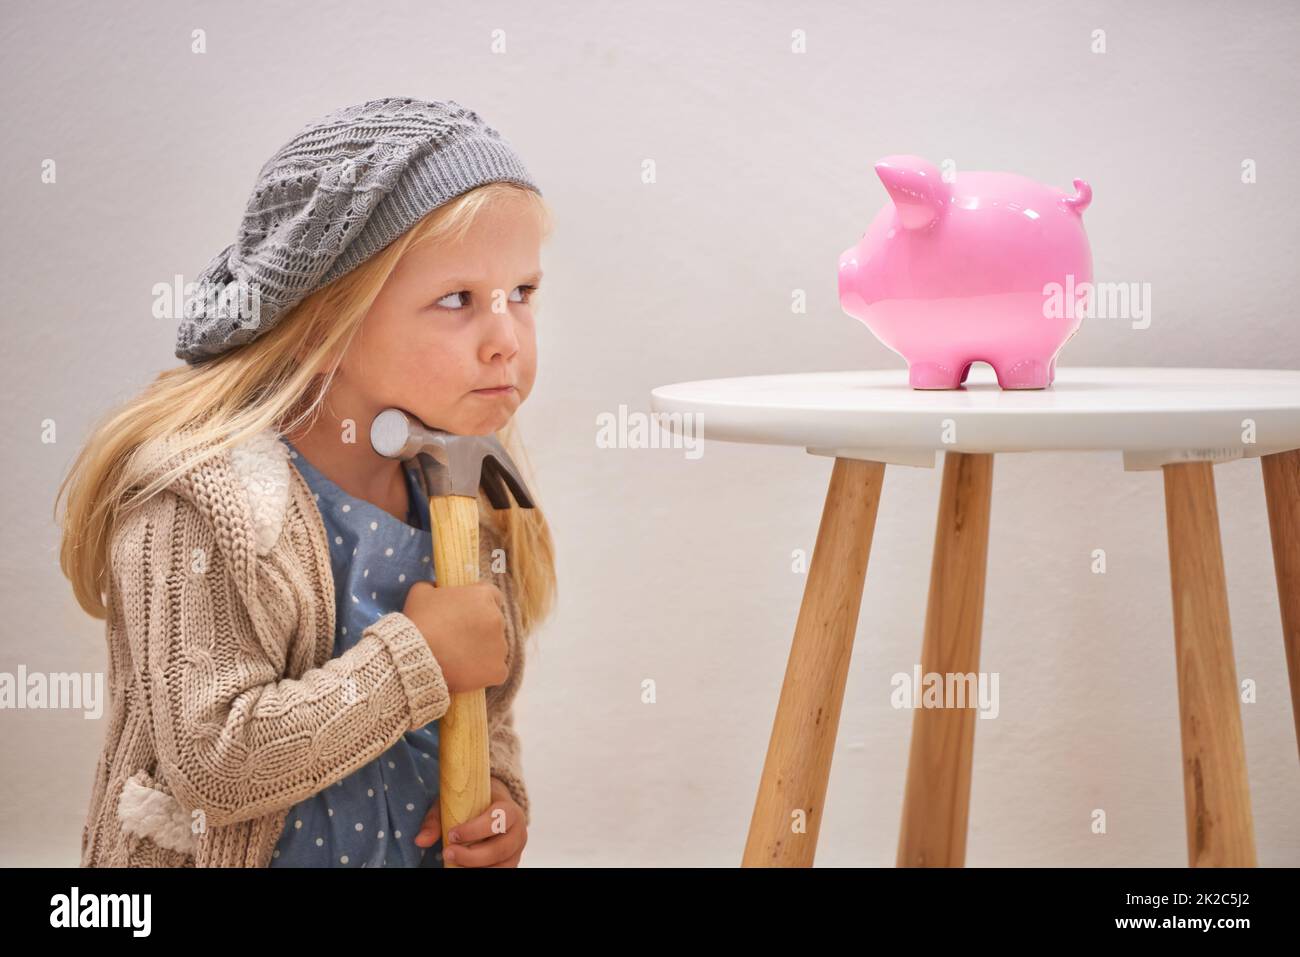 To break or not to break. A cute girl with a hammer eyeing her piggy bank. Stock Photo